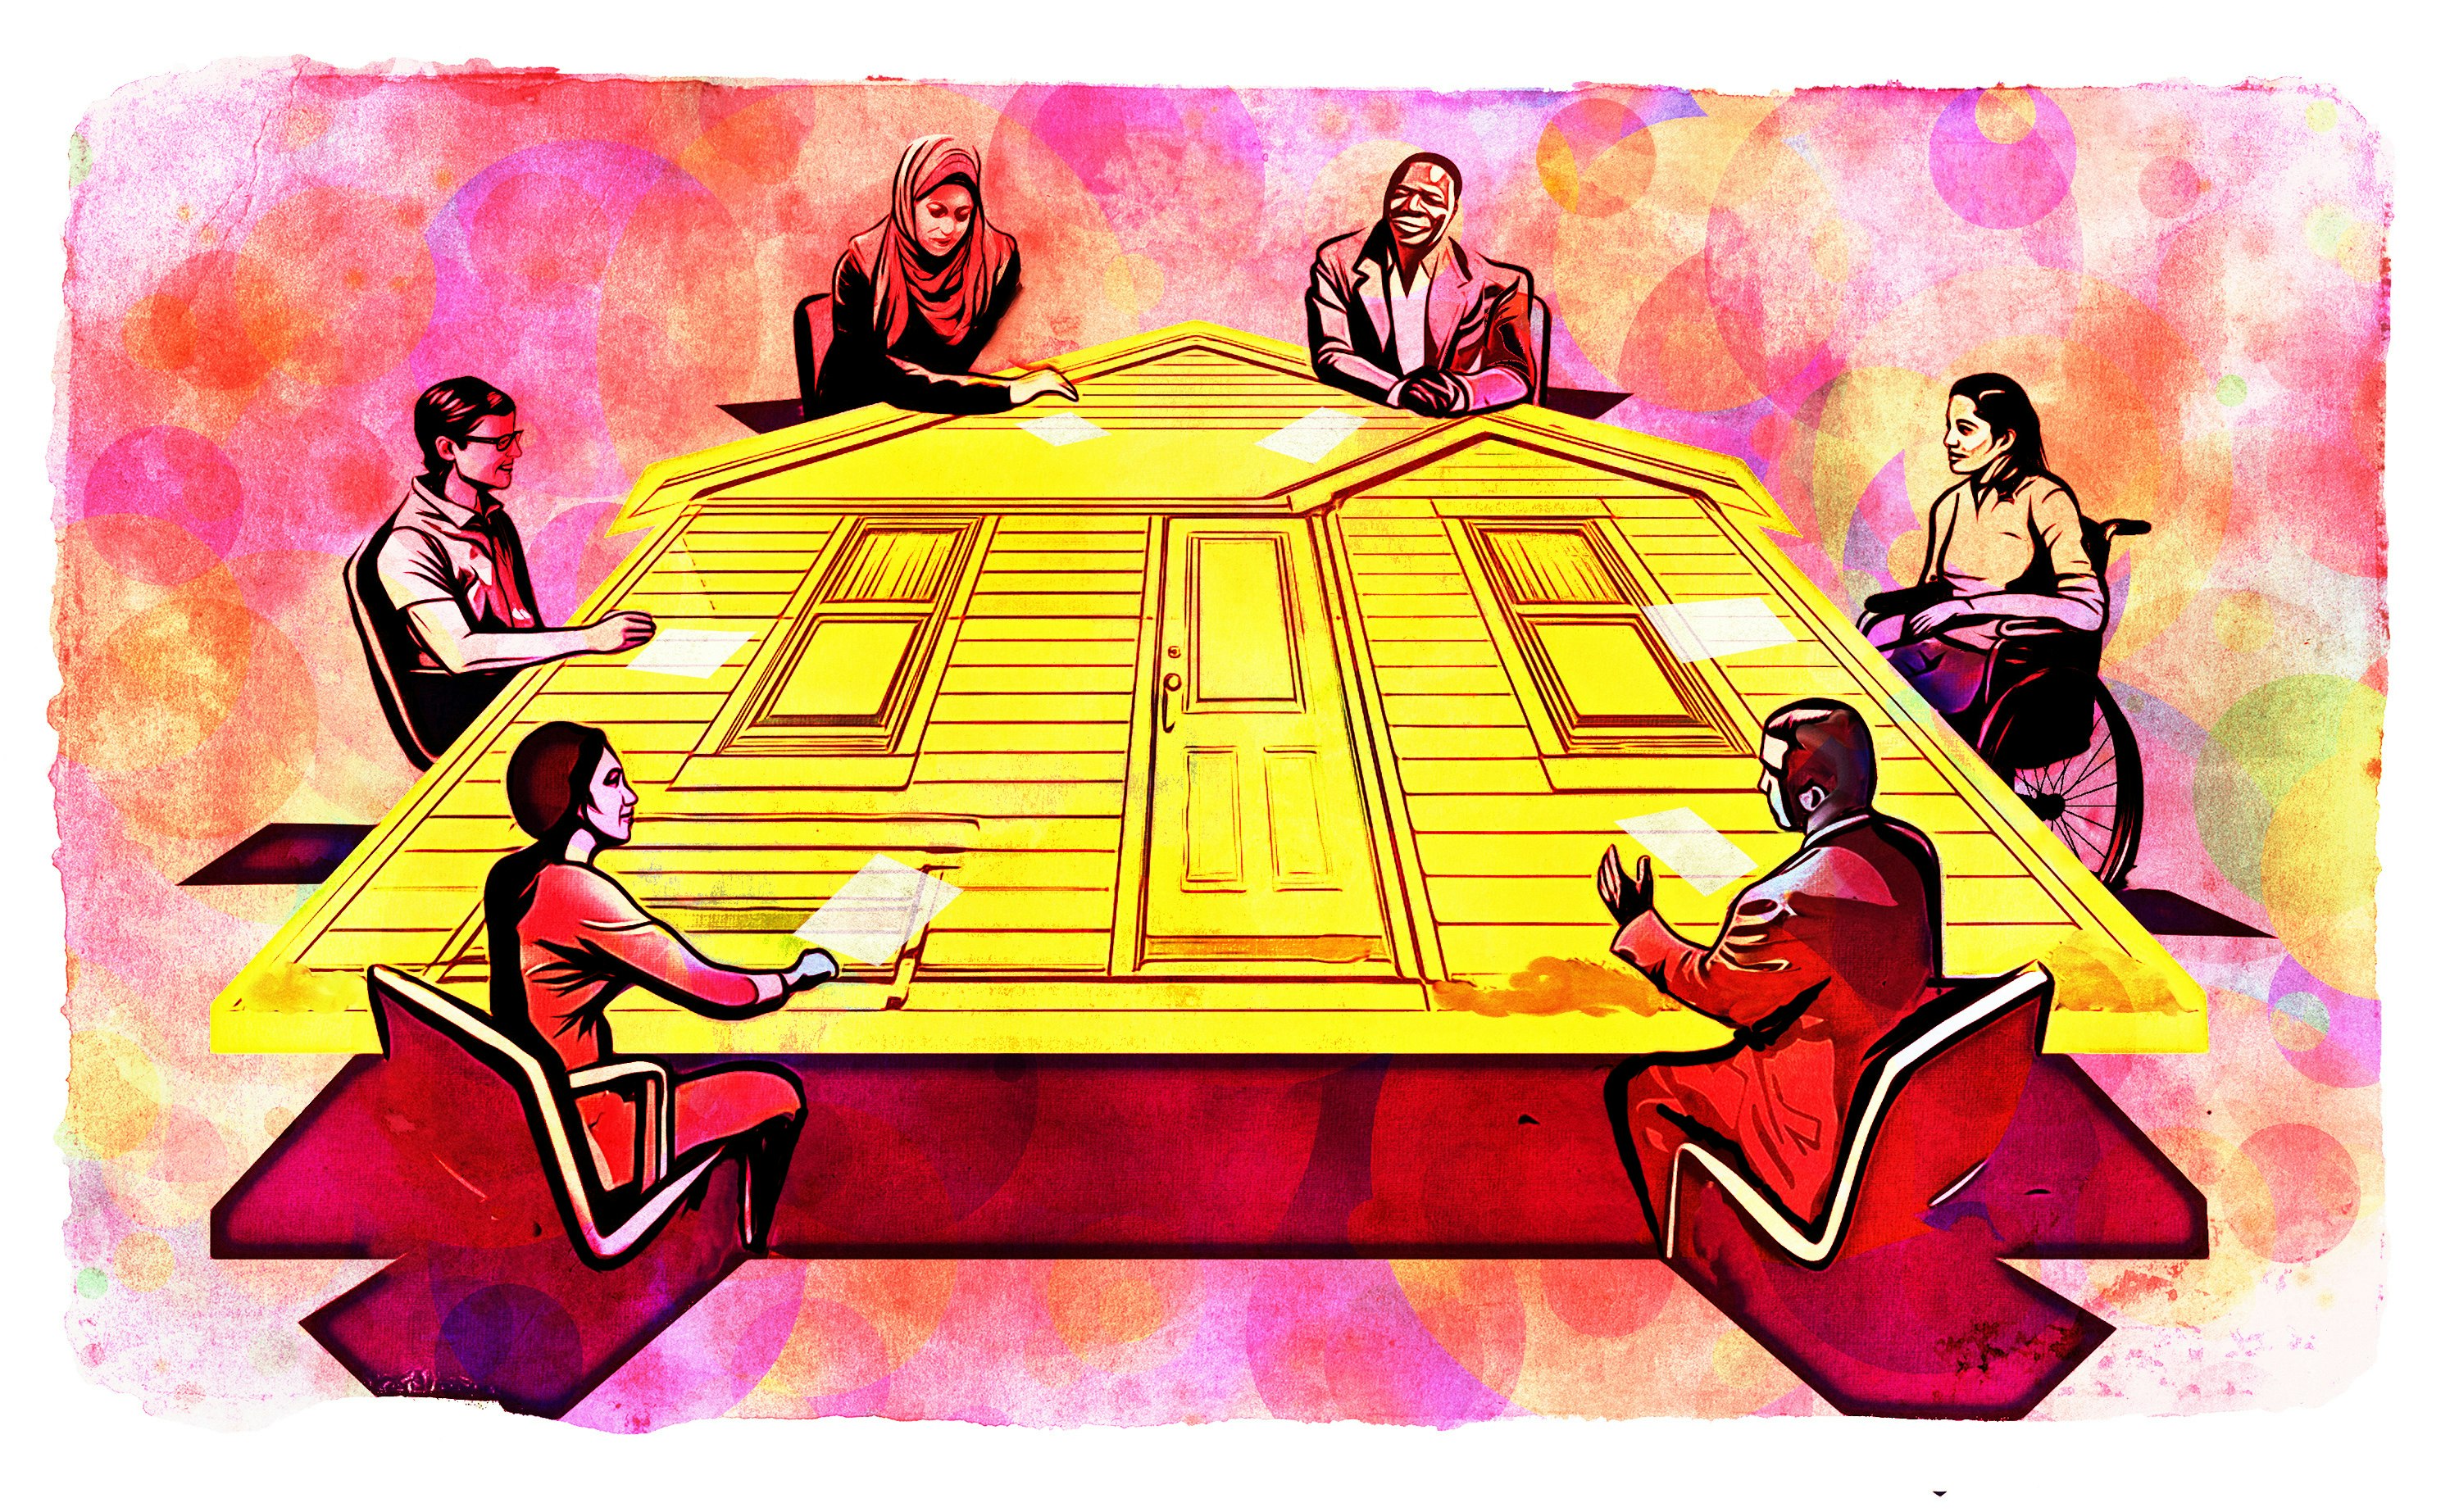 Illustration of a group of people meeting around a table shaped like a house